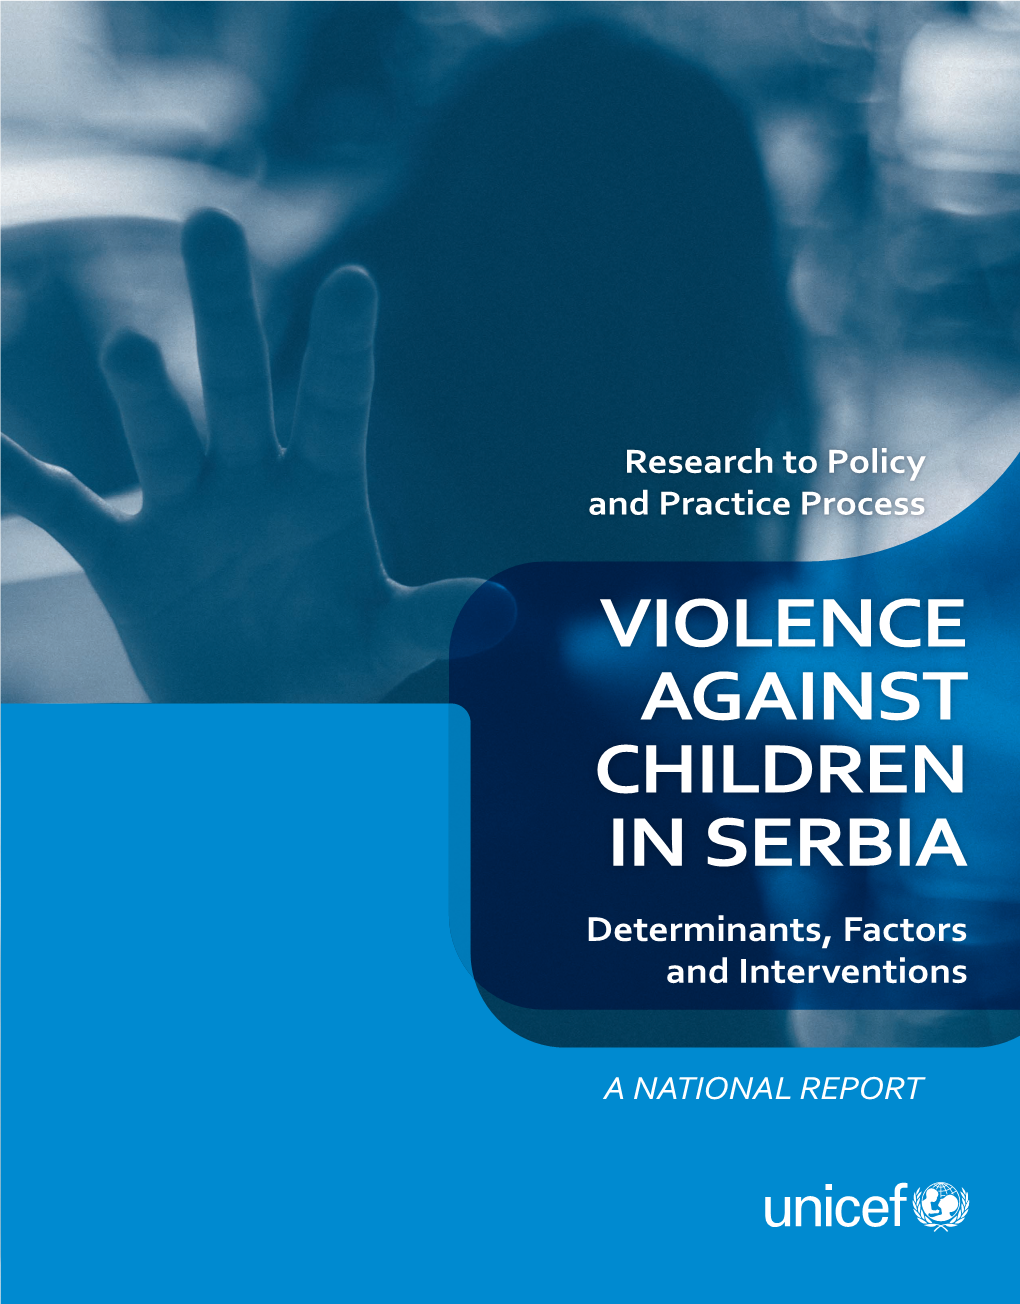 VIOLENCE AGAINST CHILDREN in SERBIA Determinants, Factors and Interventions